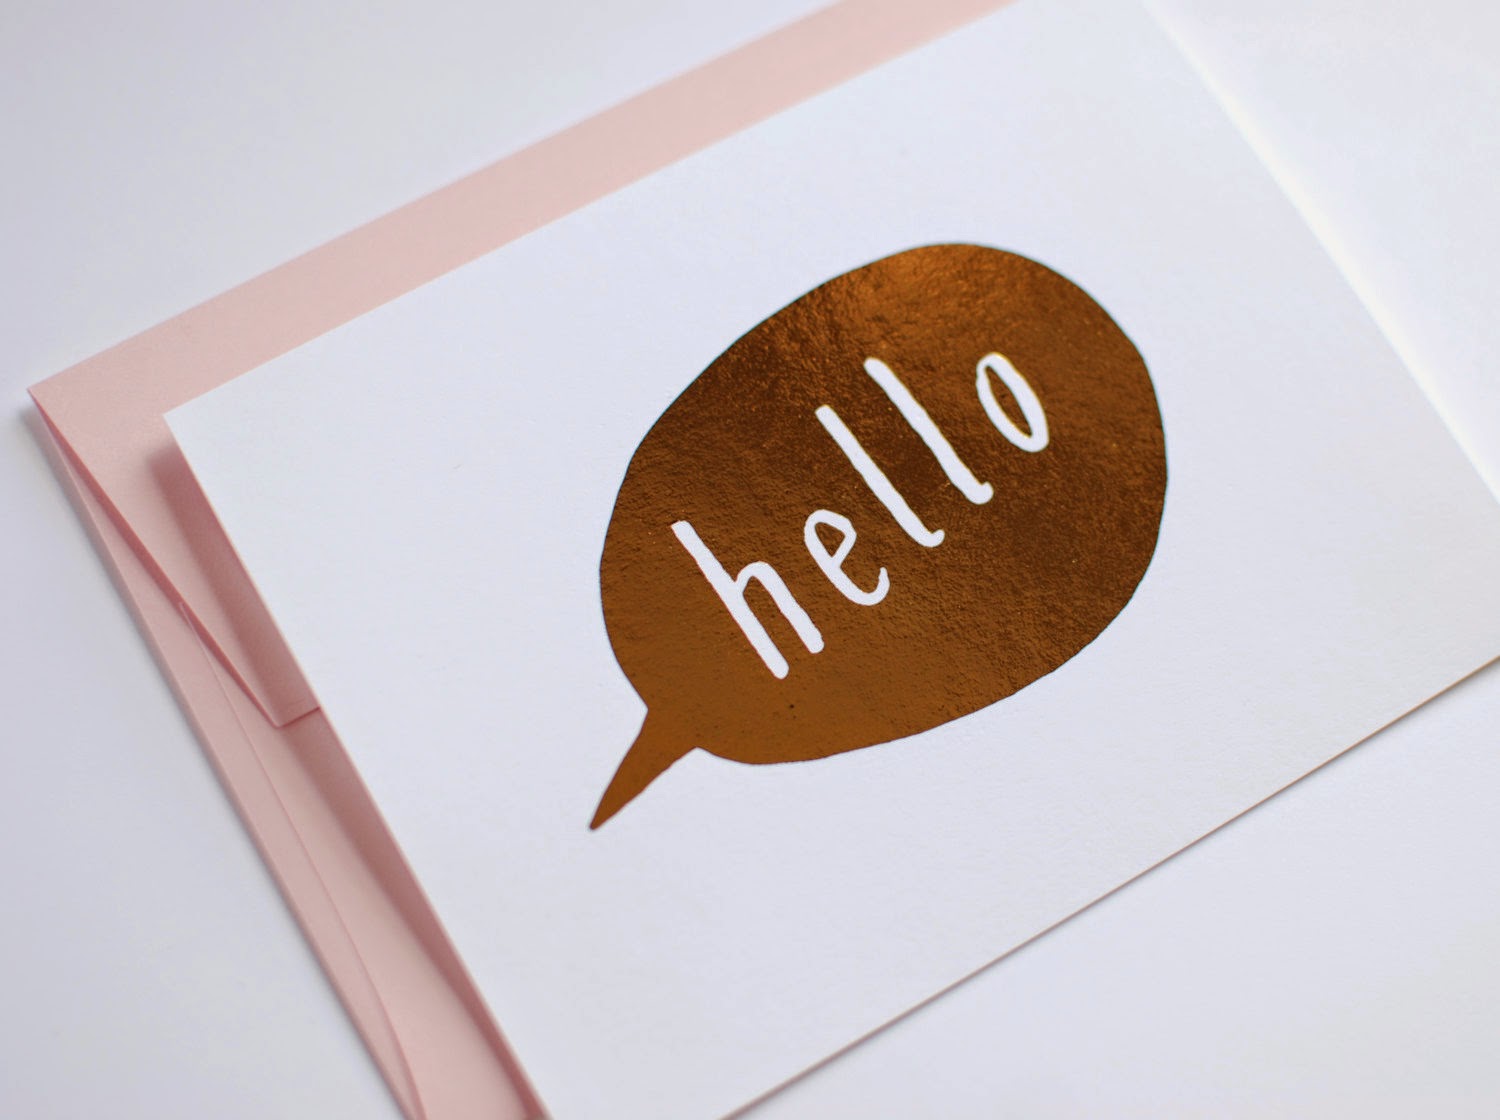 https://www.etsy.com/listing/189347281/hello-gold-foil-card-card-for-a-friend?ref=shop_home_active_12